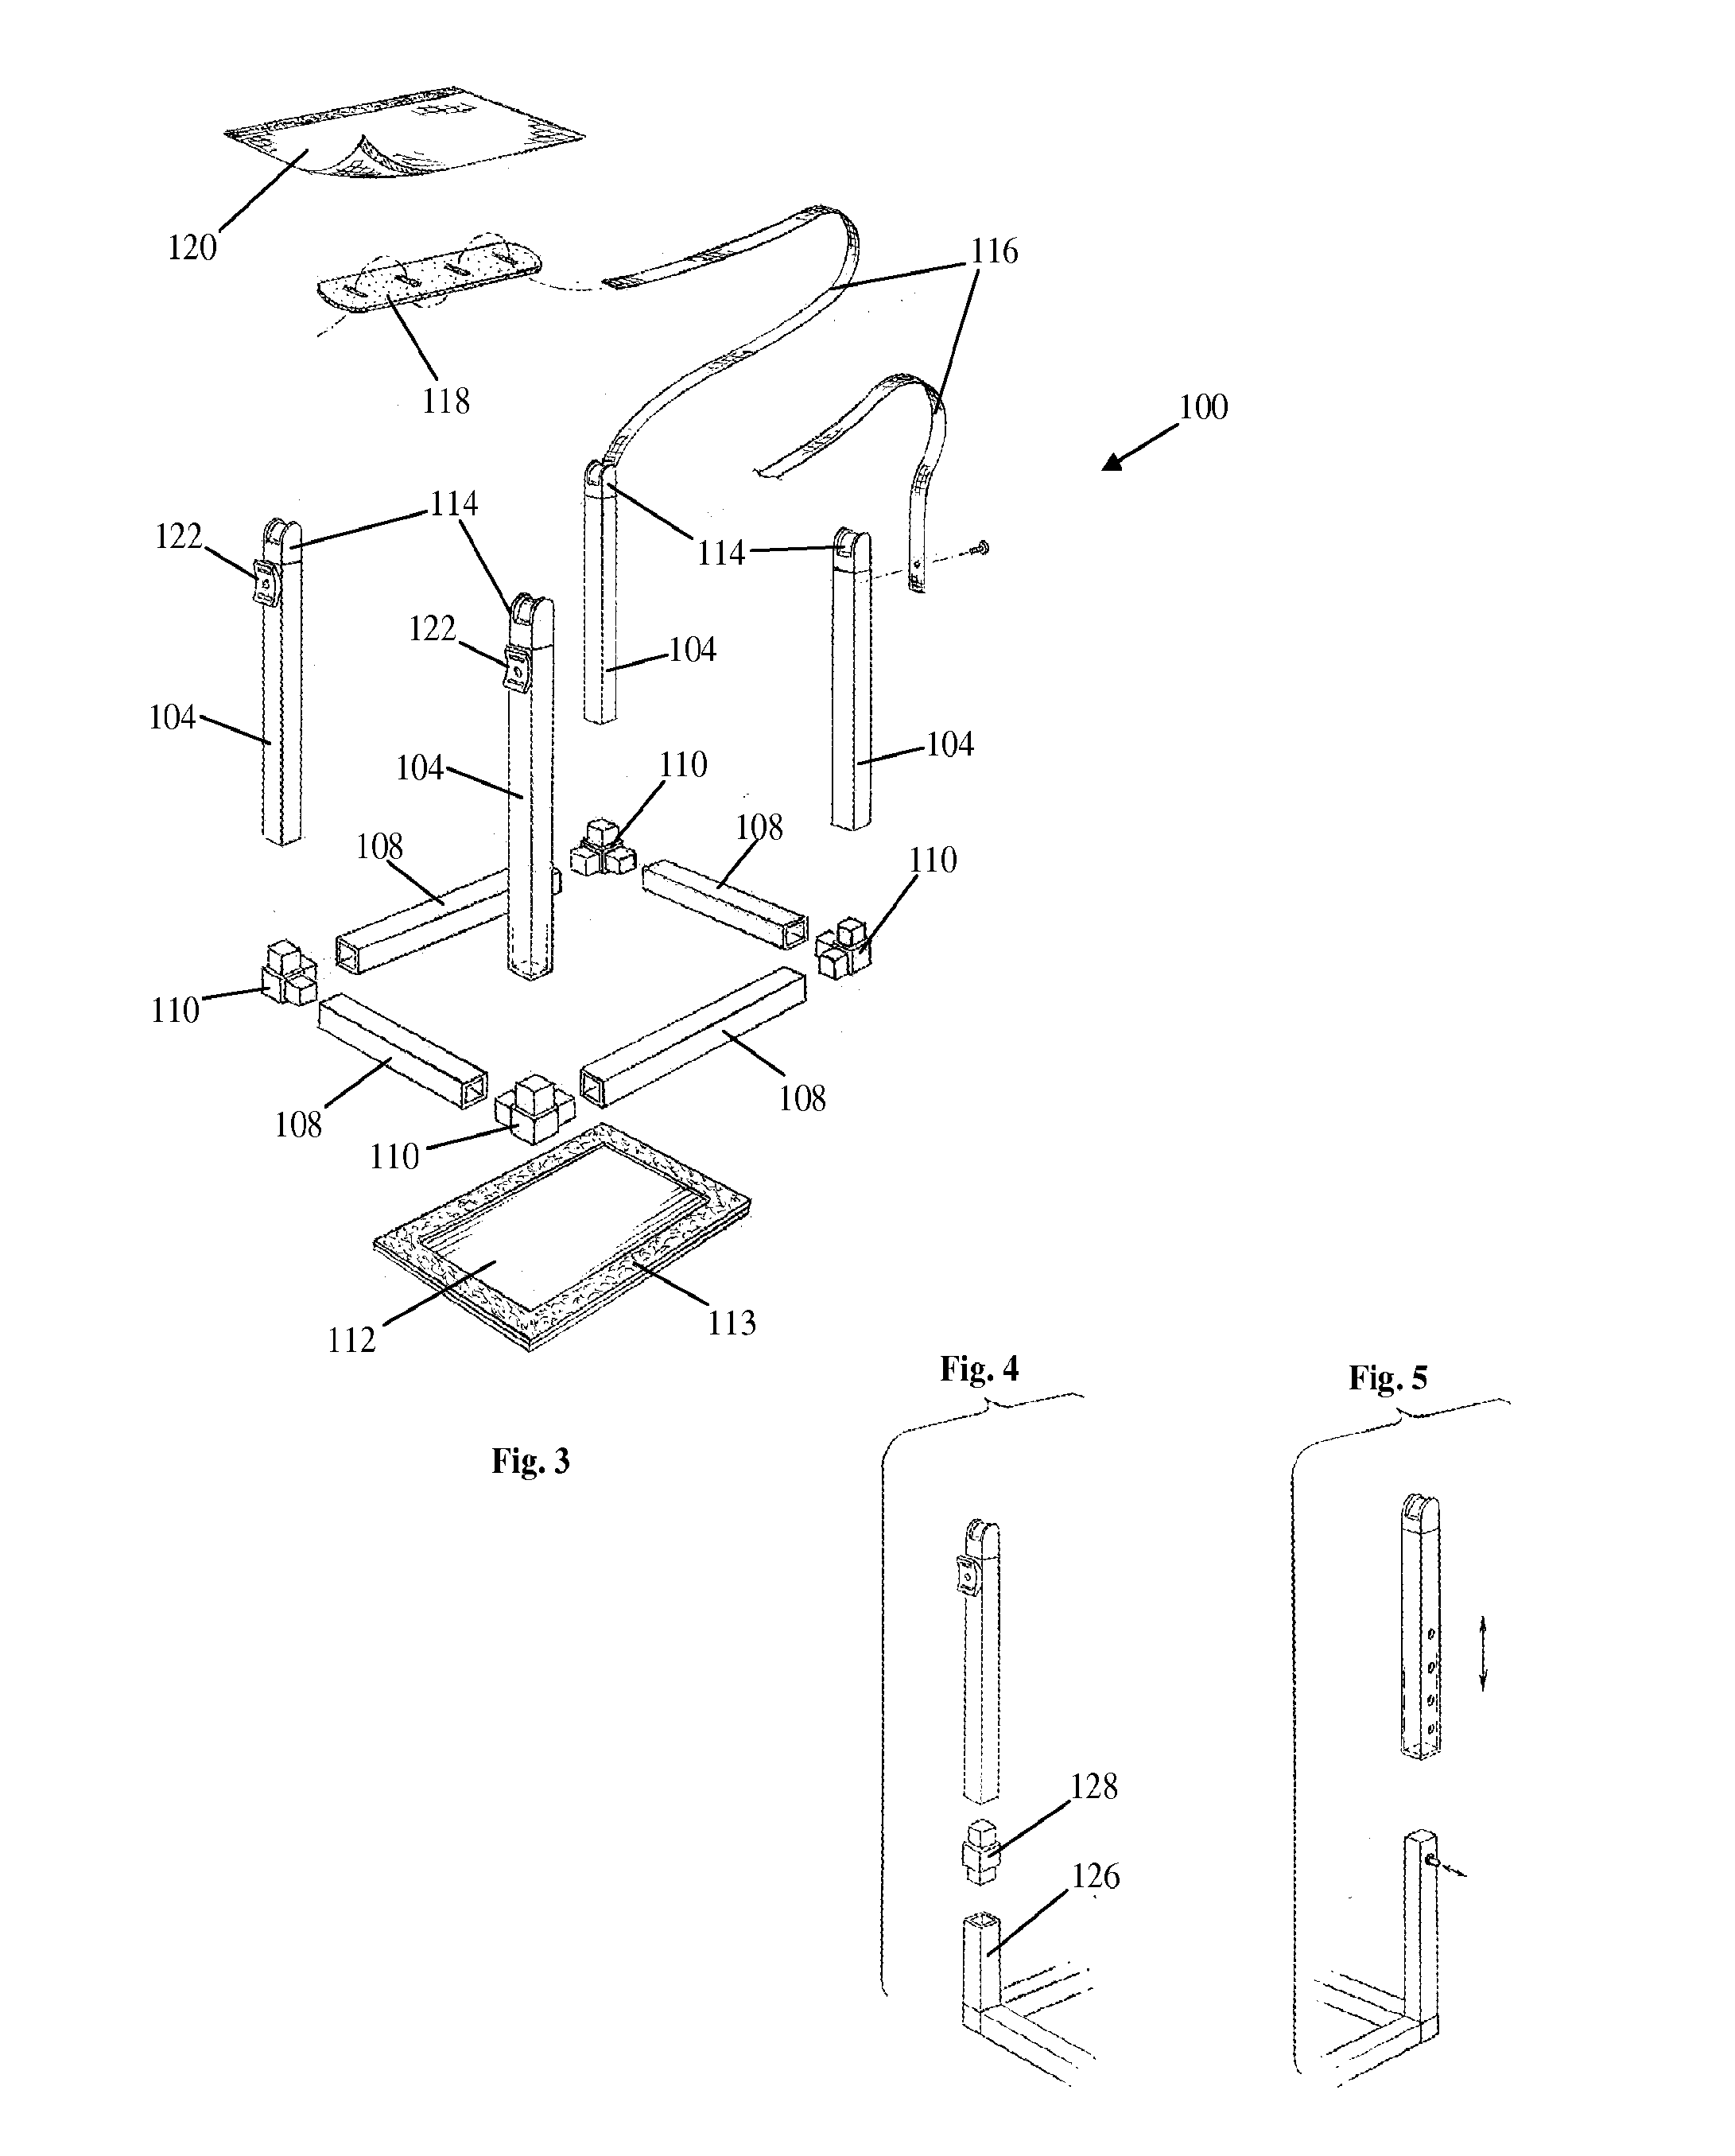 Portable extremity assessment and management device